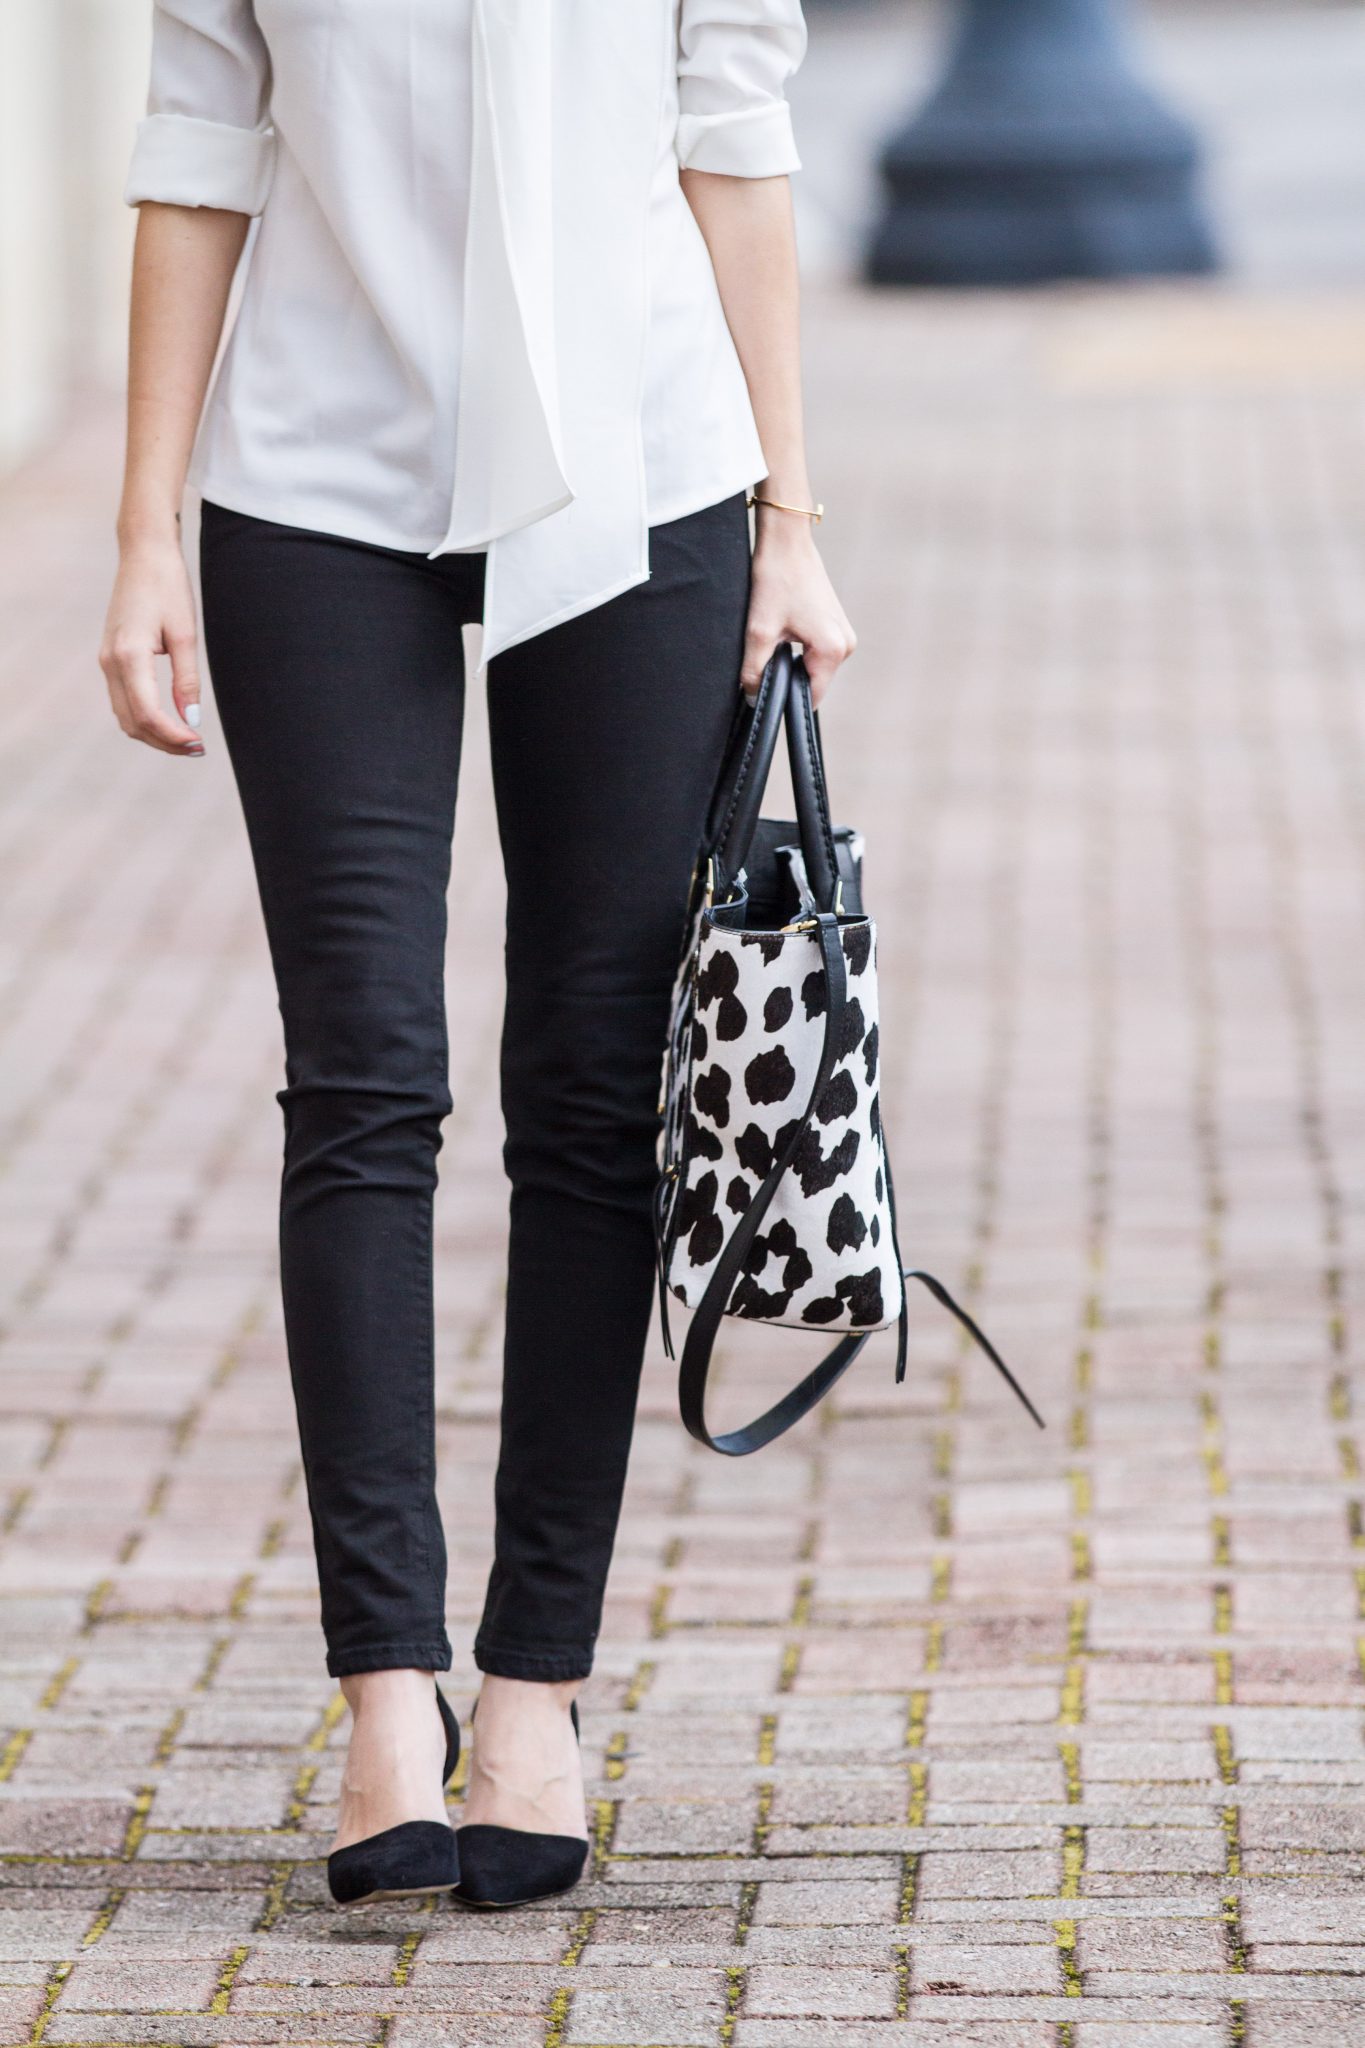 work outfit, work style, boss lady, girl boss, business casual, henri bendel, high neck blouse, work outfit ideas, work appropriate style, black and white outfits